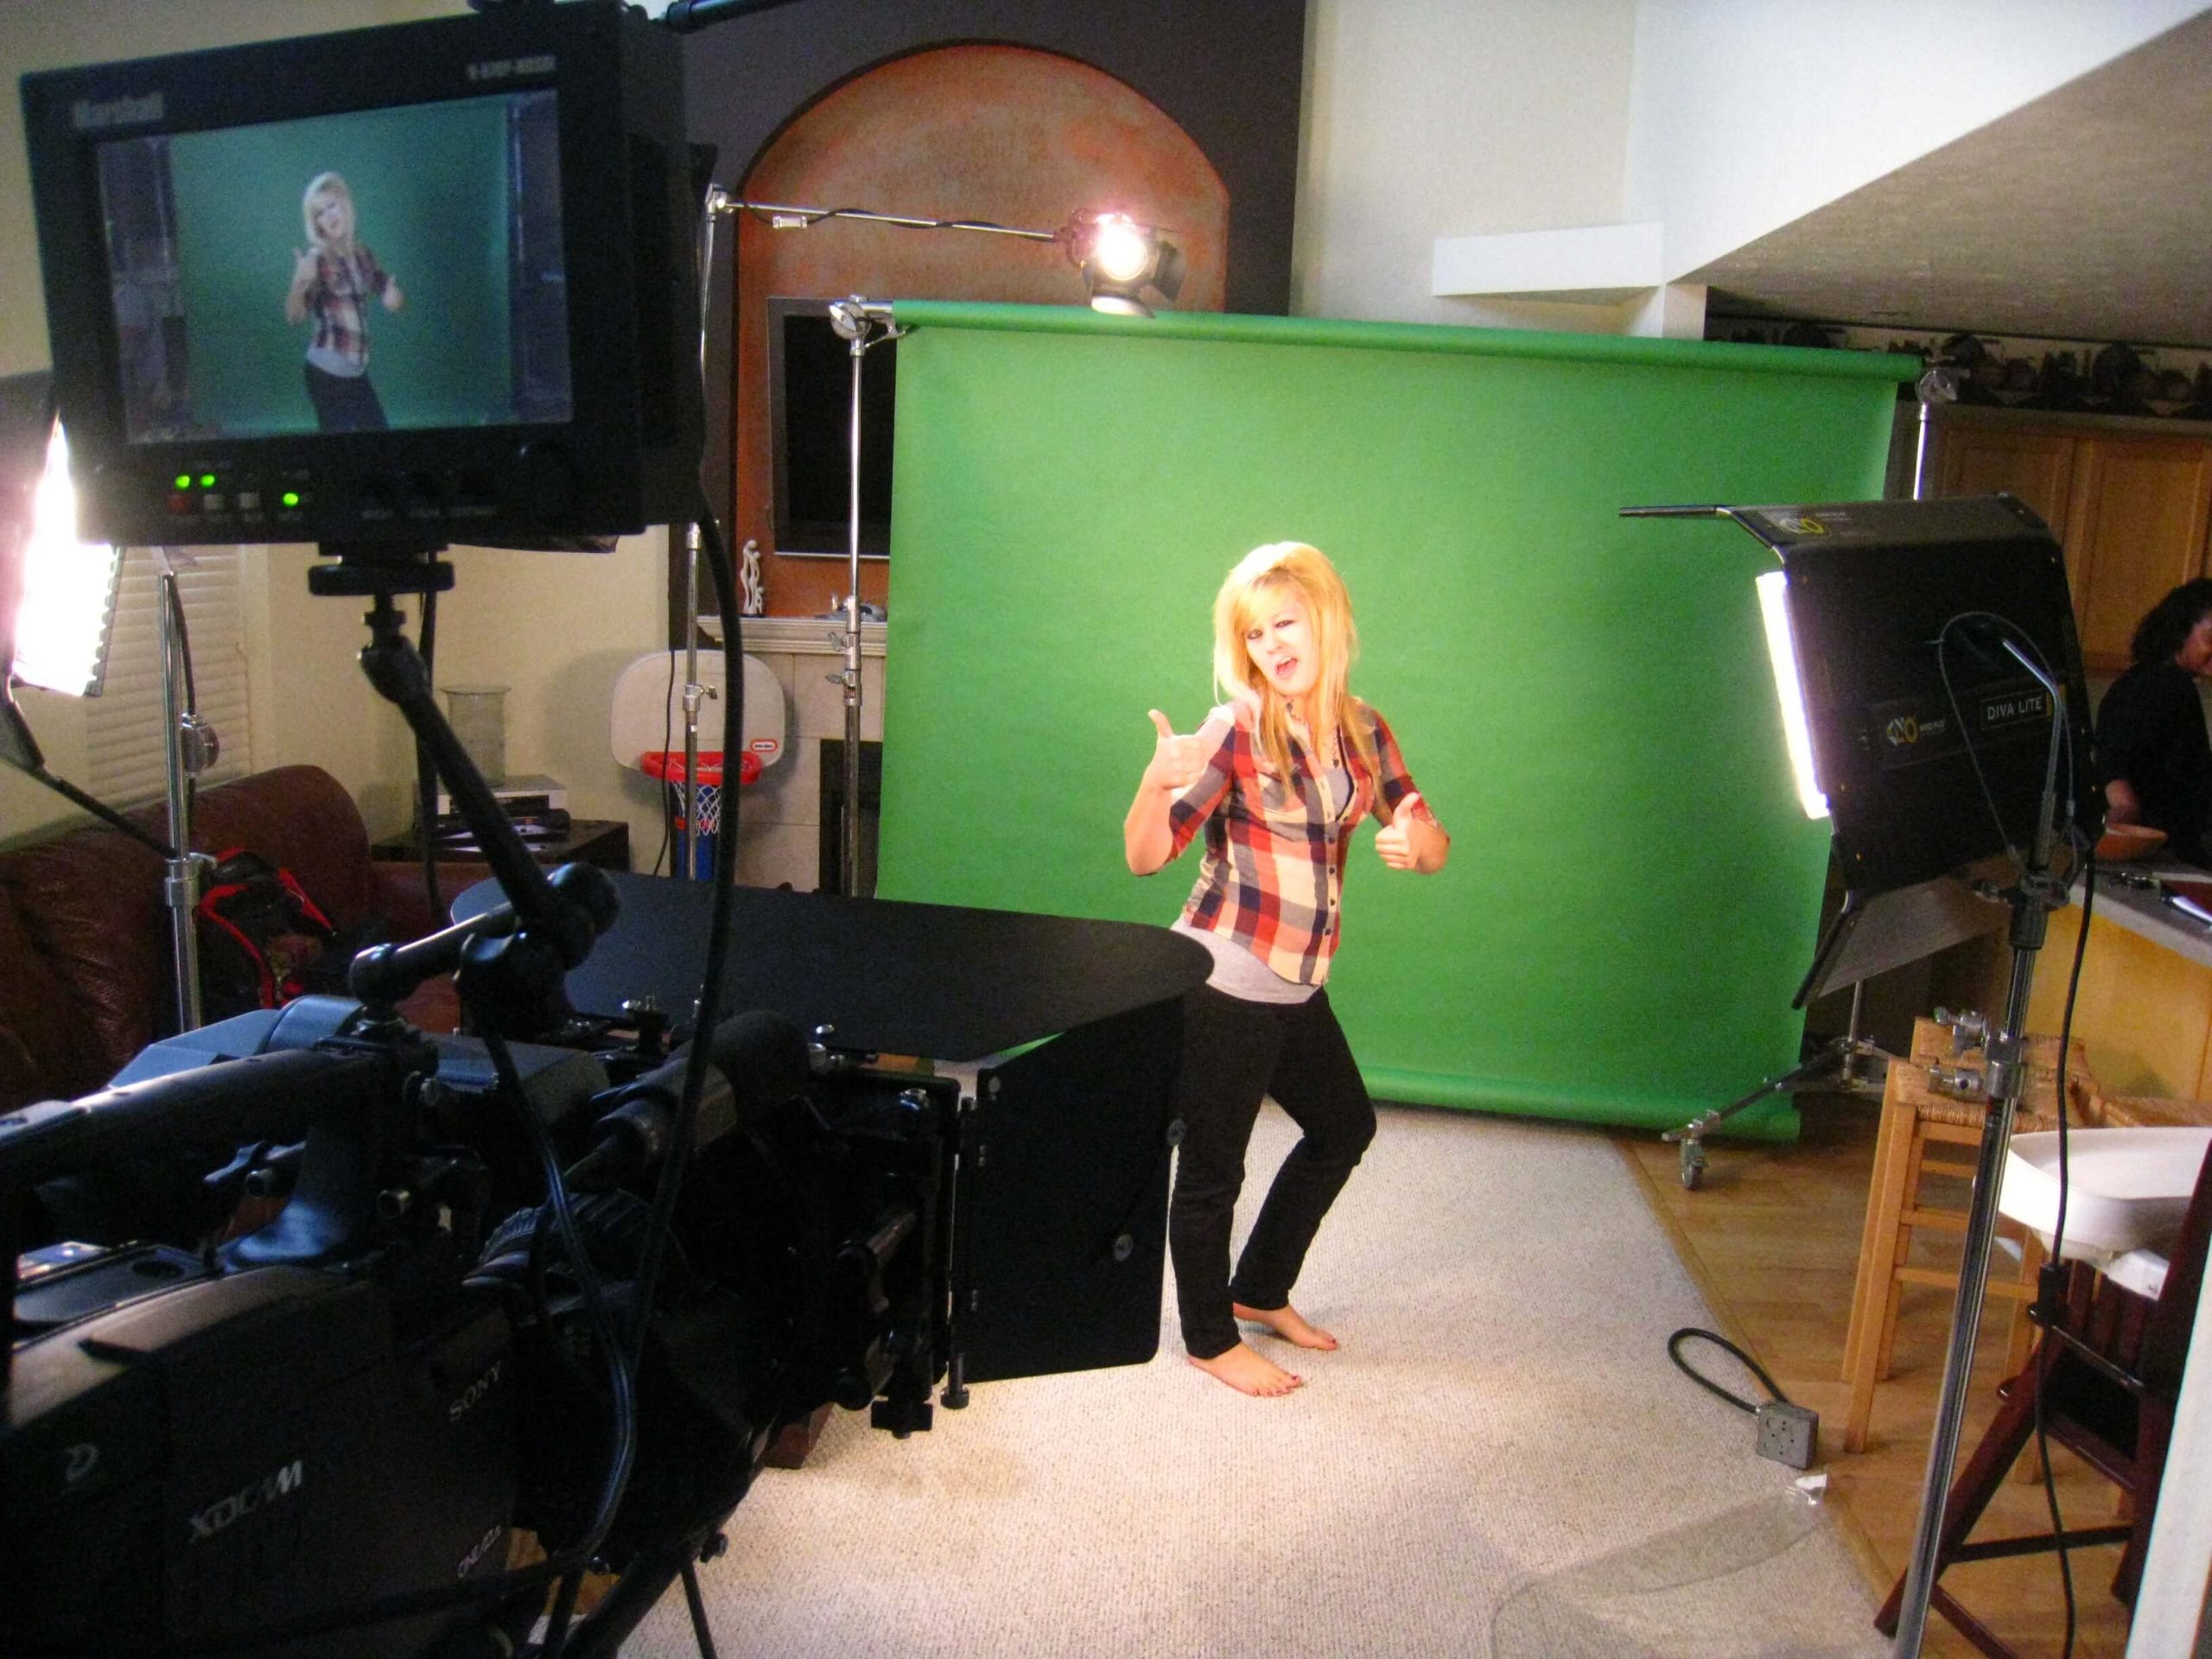 Chelsey, one of the teen interviews, did some poses for her introduction.